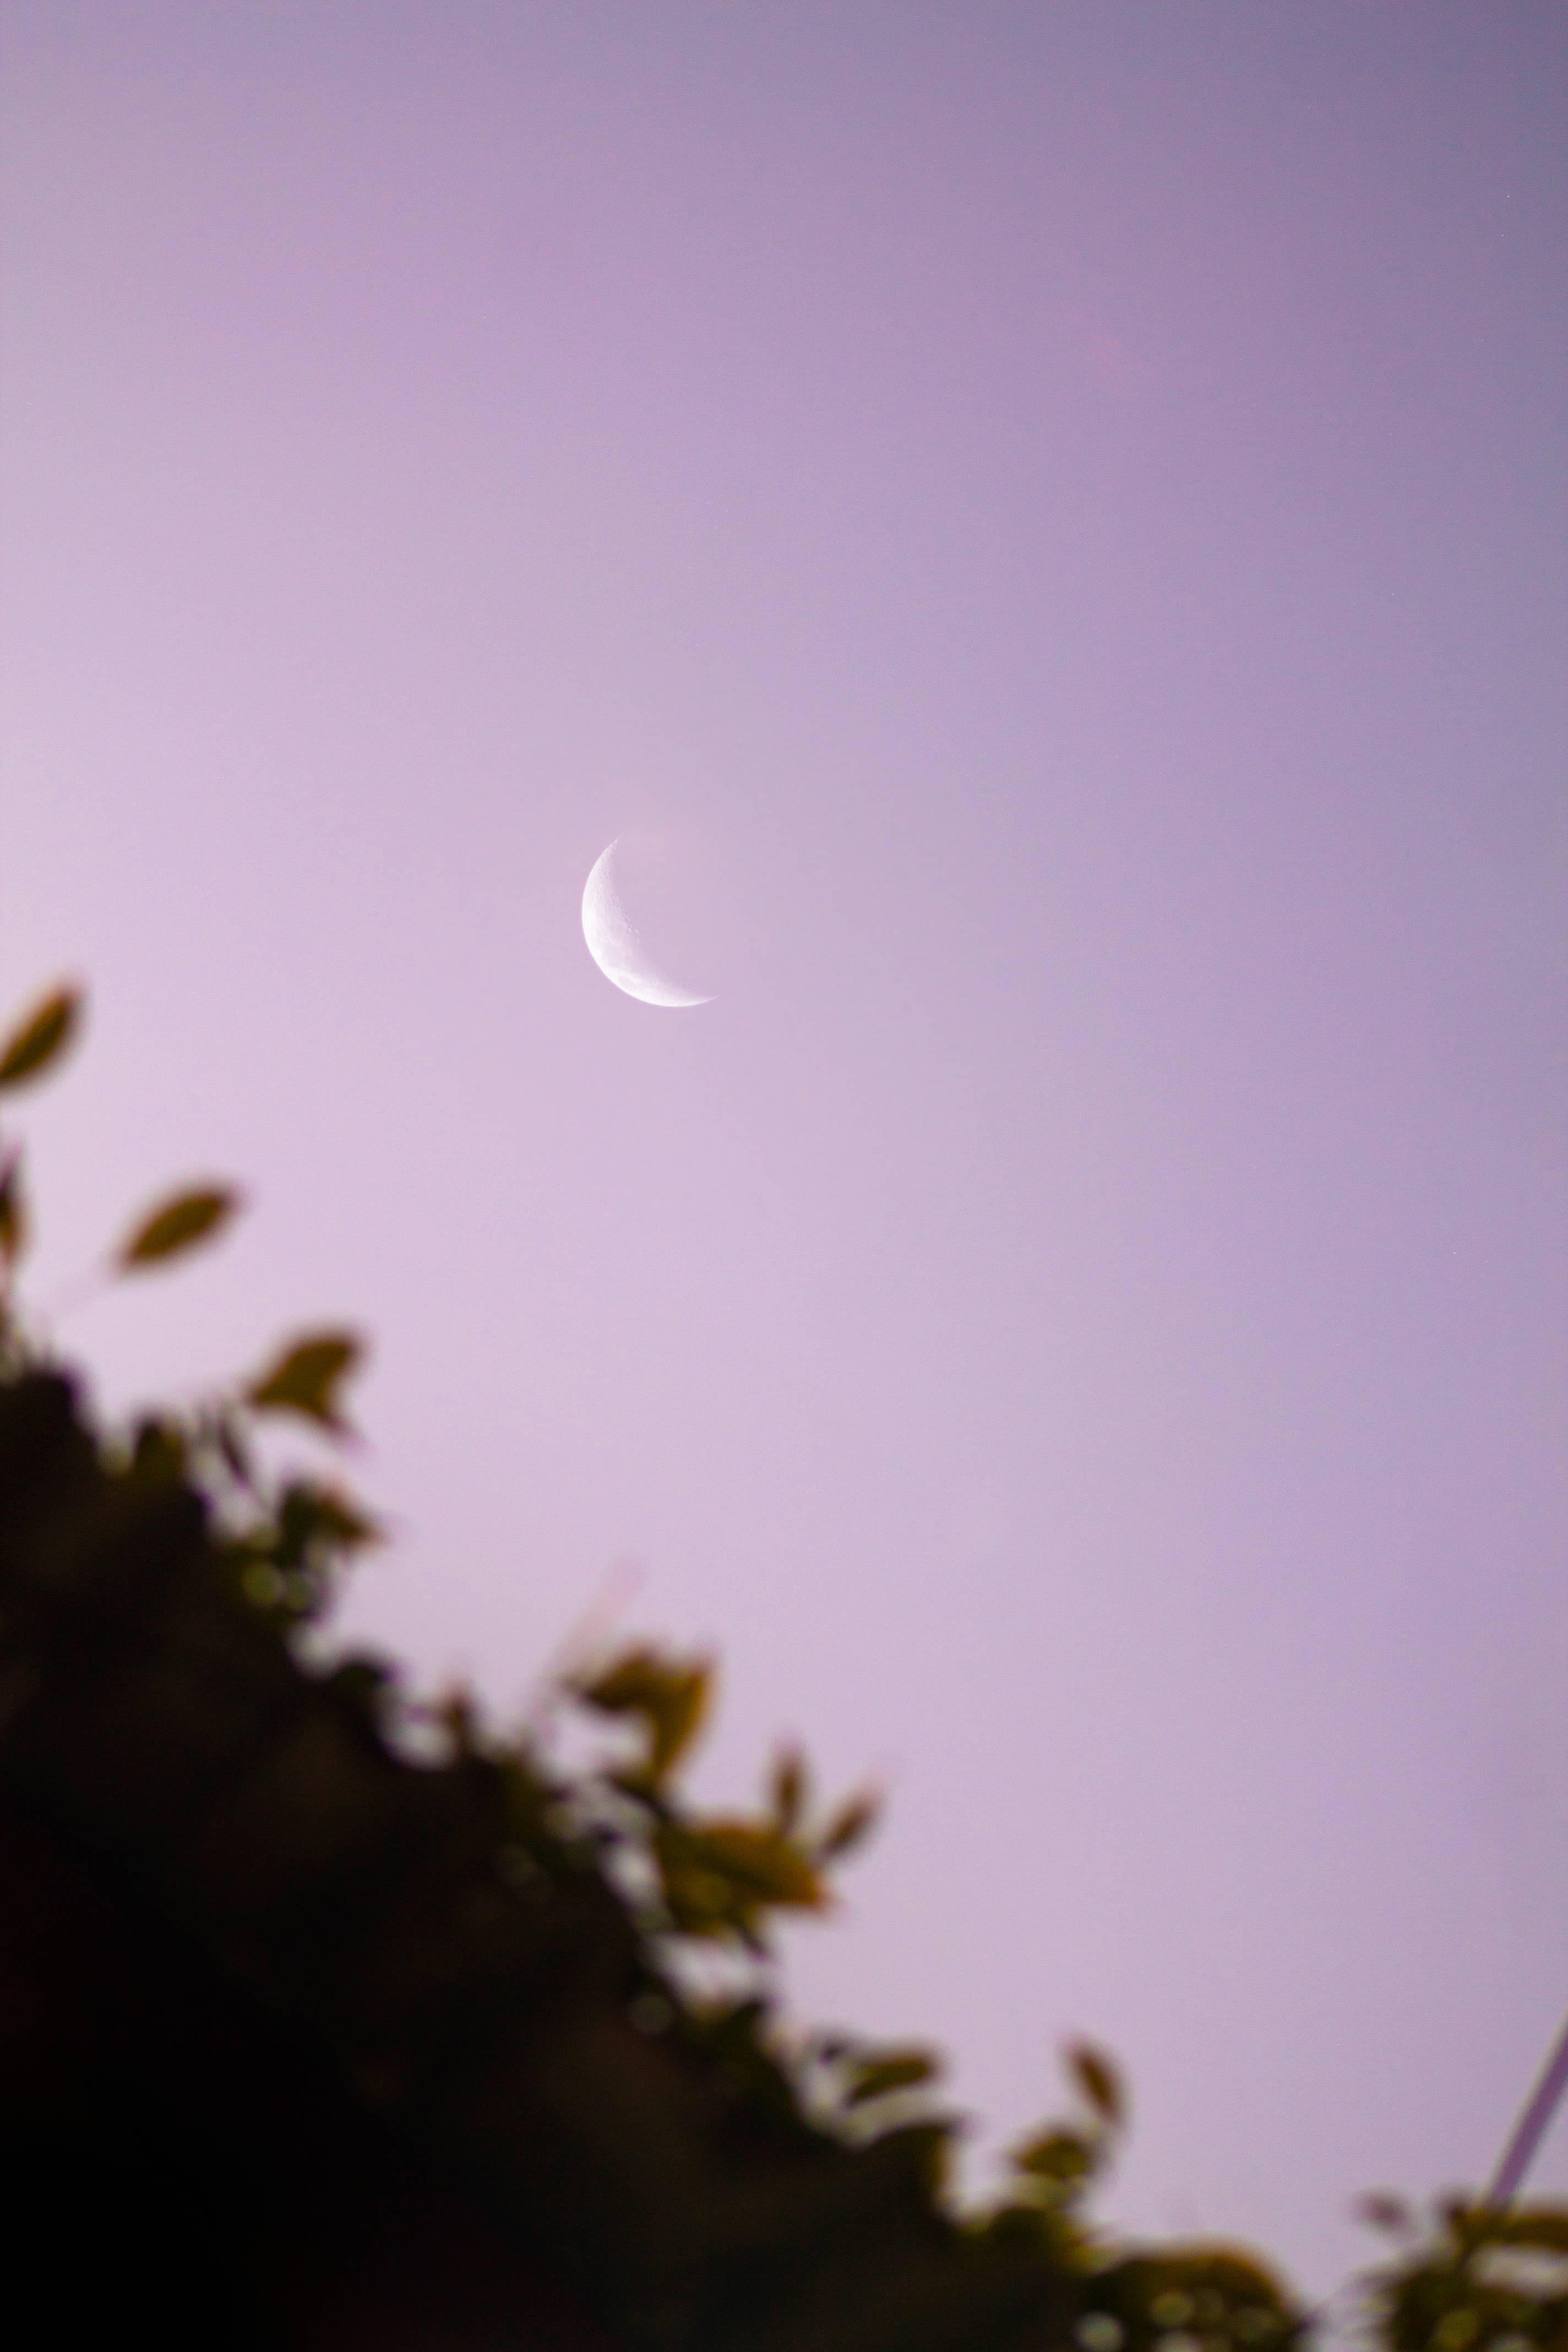 A crescent moon, partially obscured by leaves, against a purple sky. - Moon